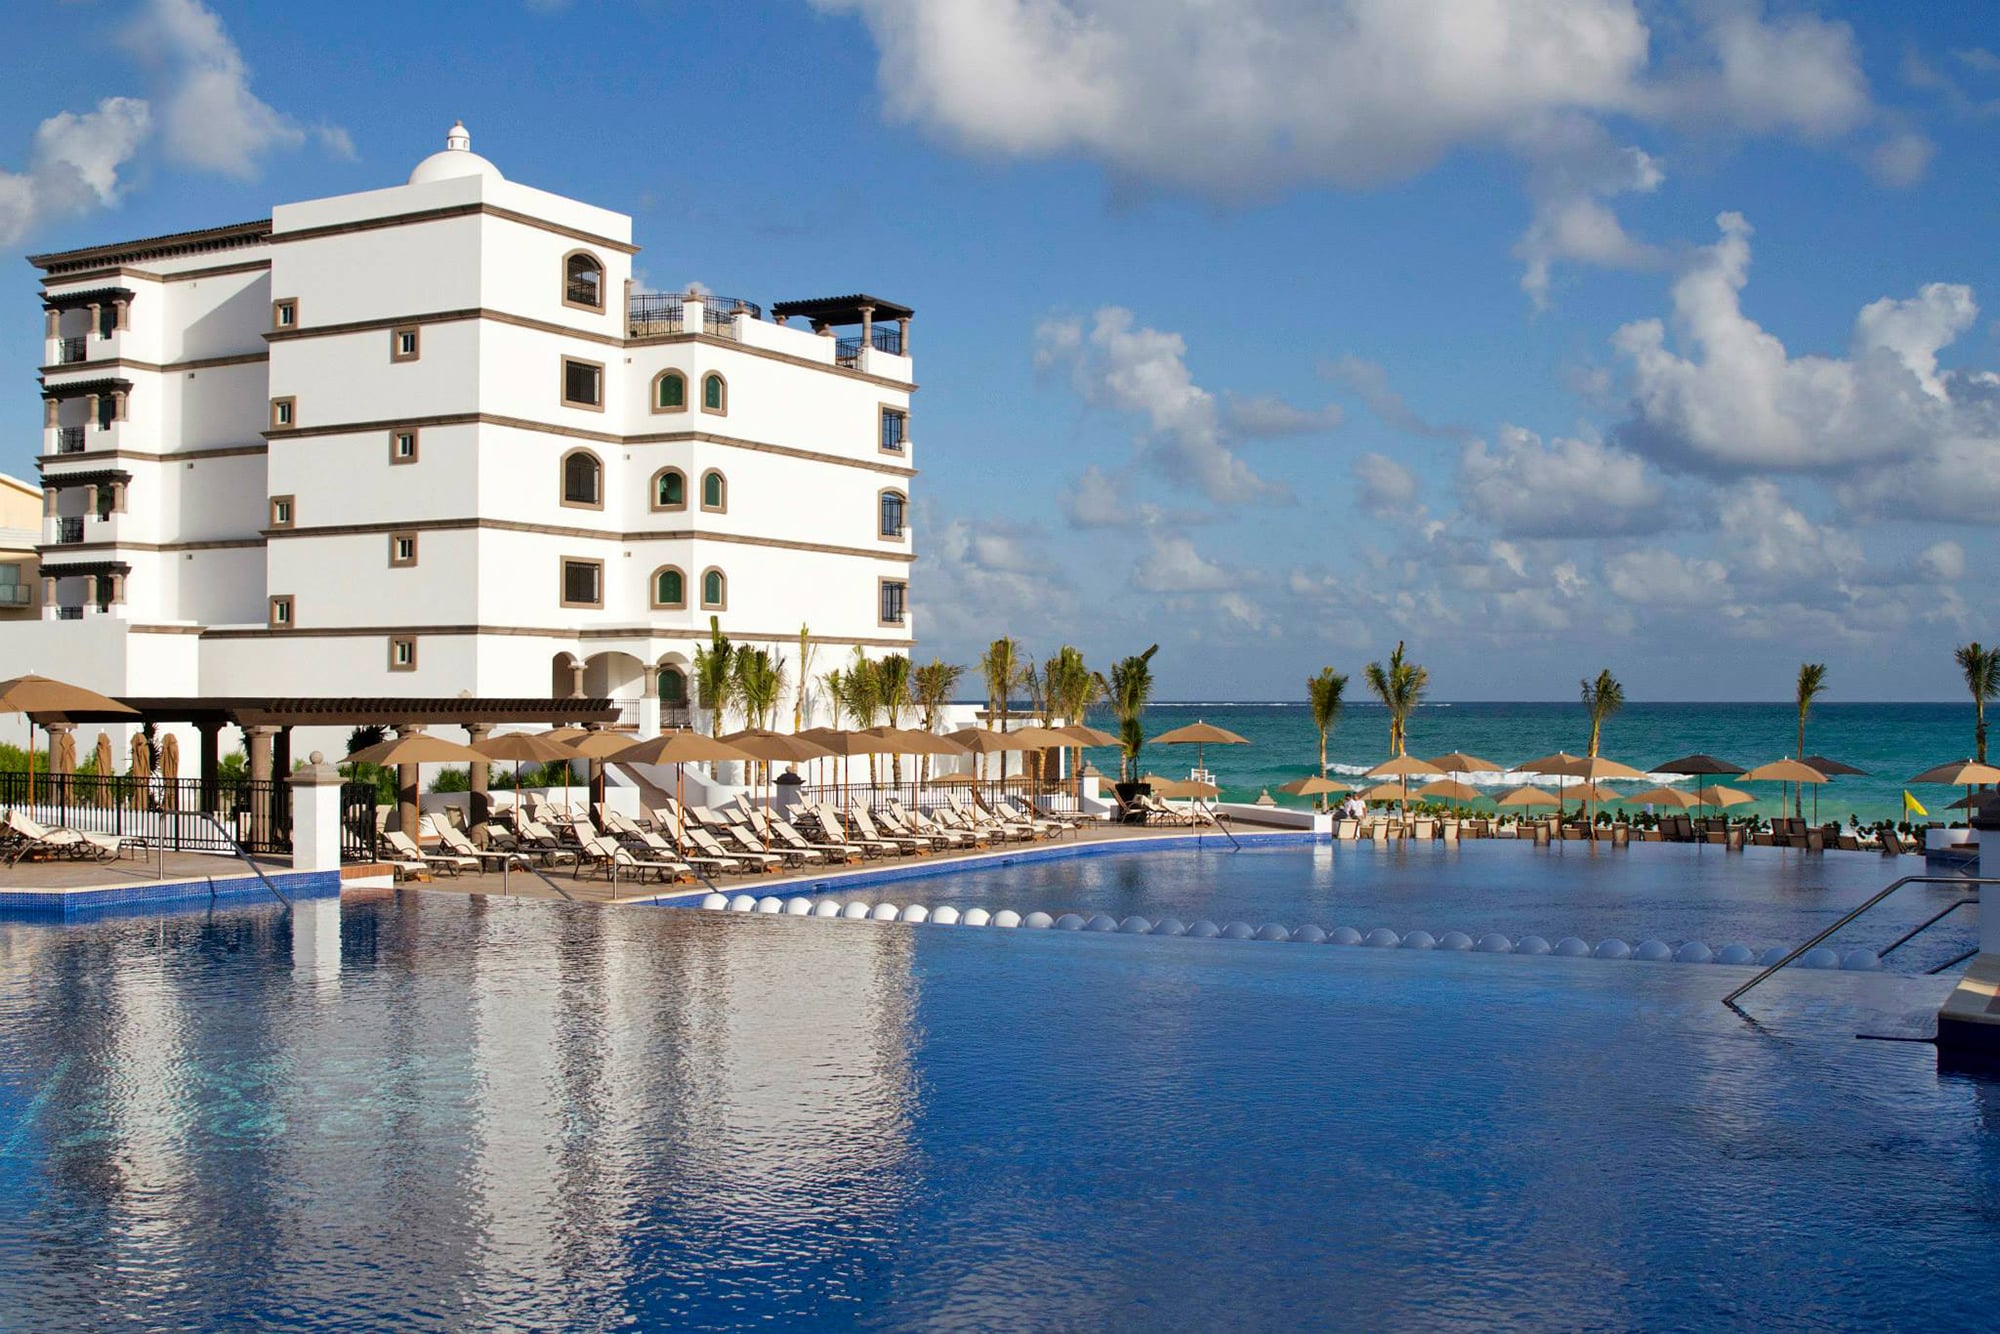 Black Friday Cyber Monday Travel Deals: Grand Residences Rivera Cancun